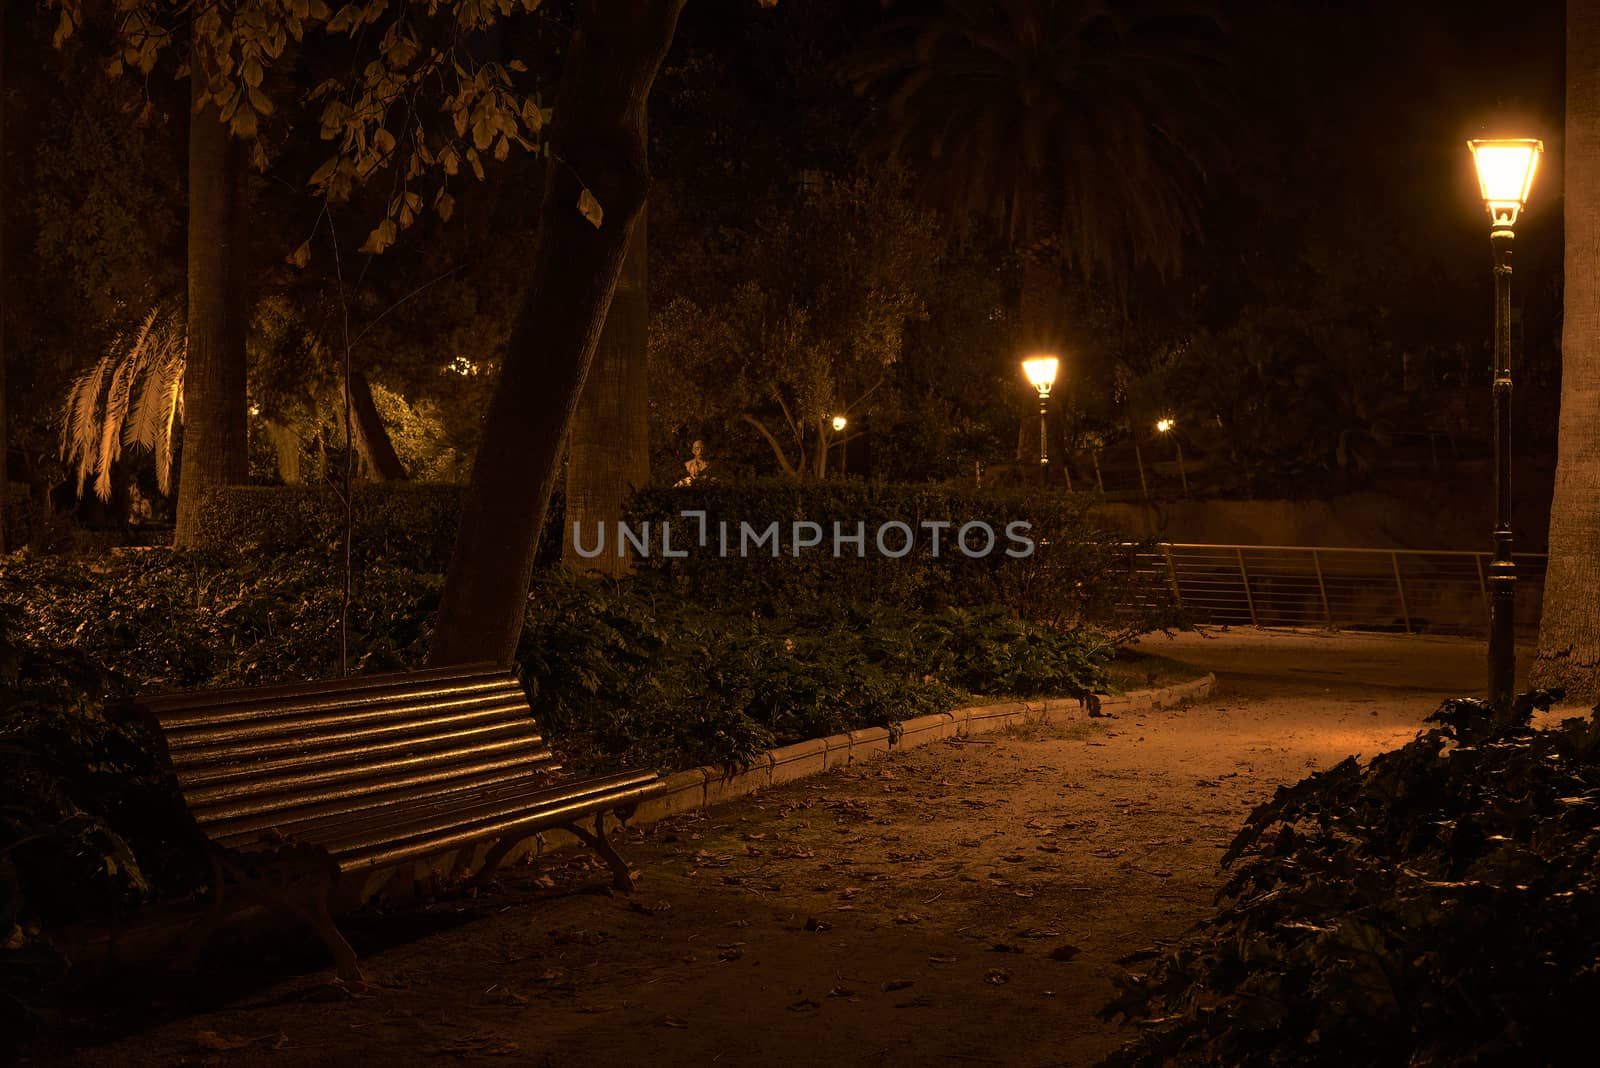 Lonely bench, in a park at night by raul_ruiz